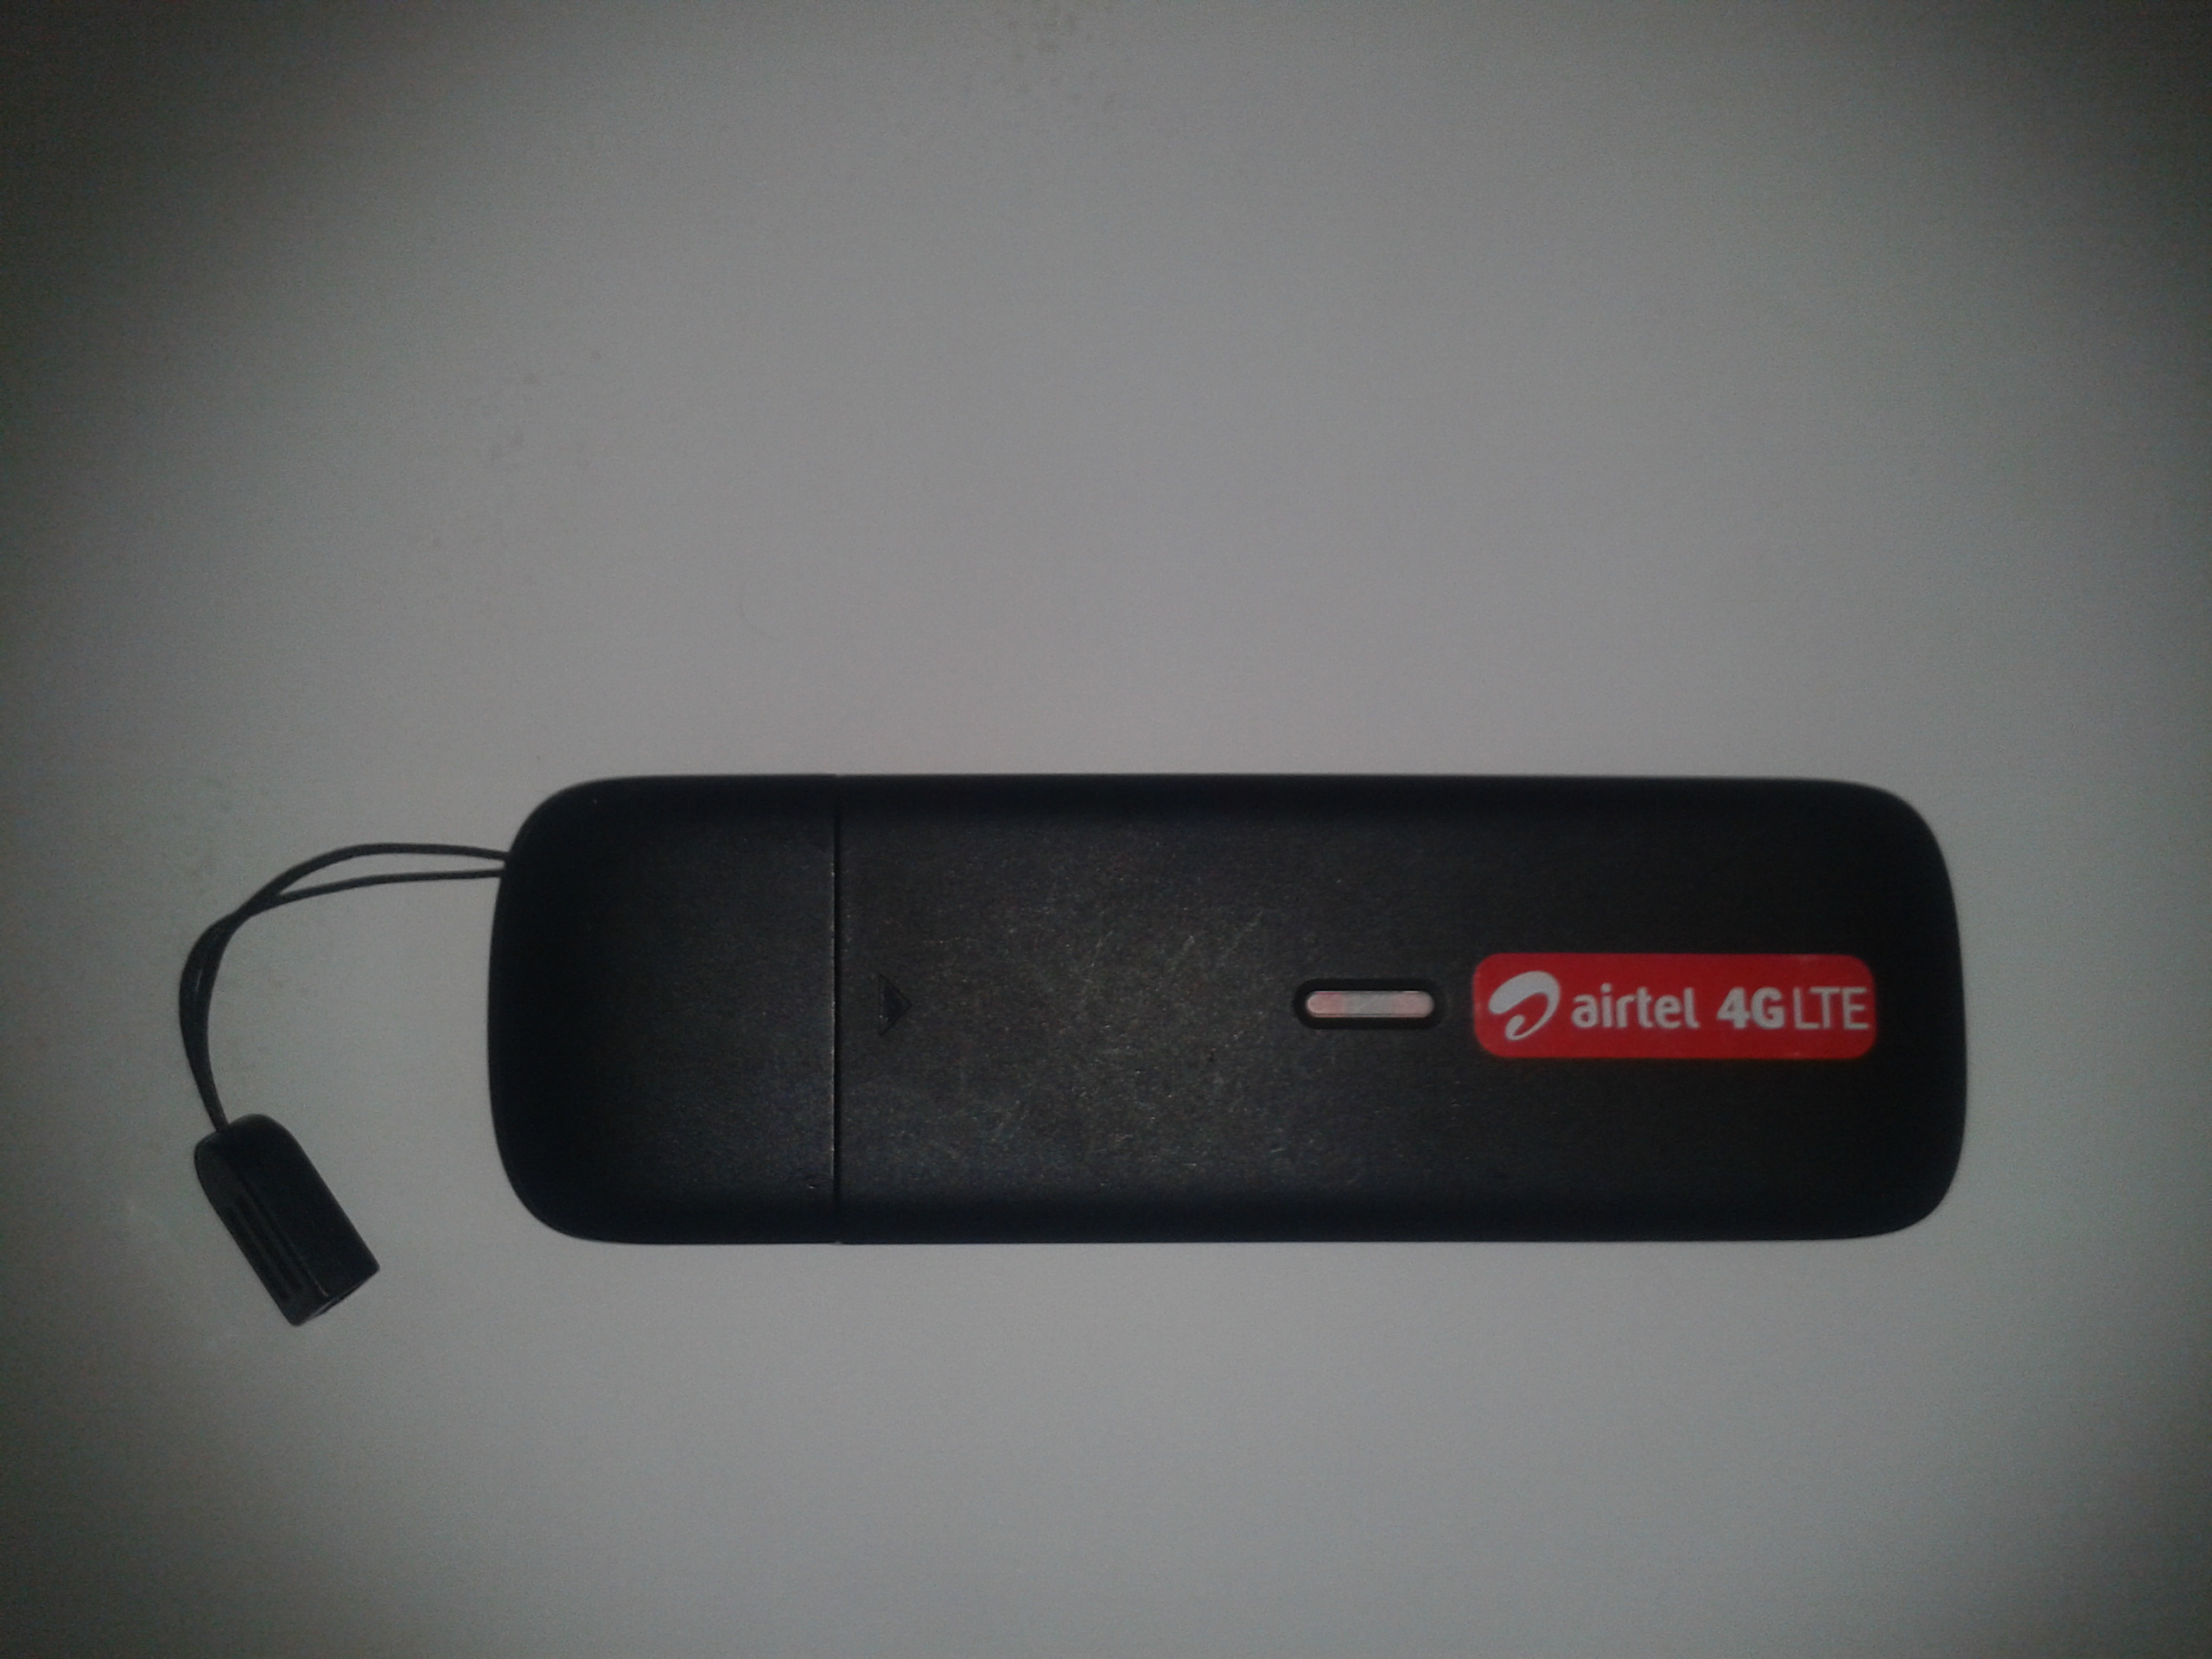 airtel 4g lte dongle software